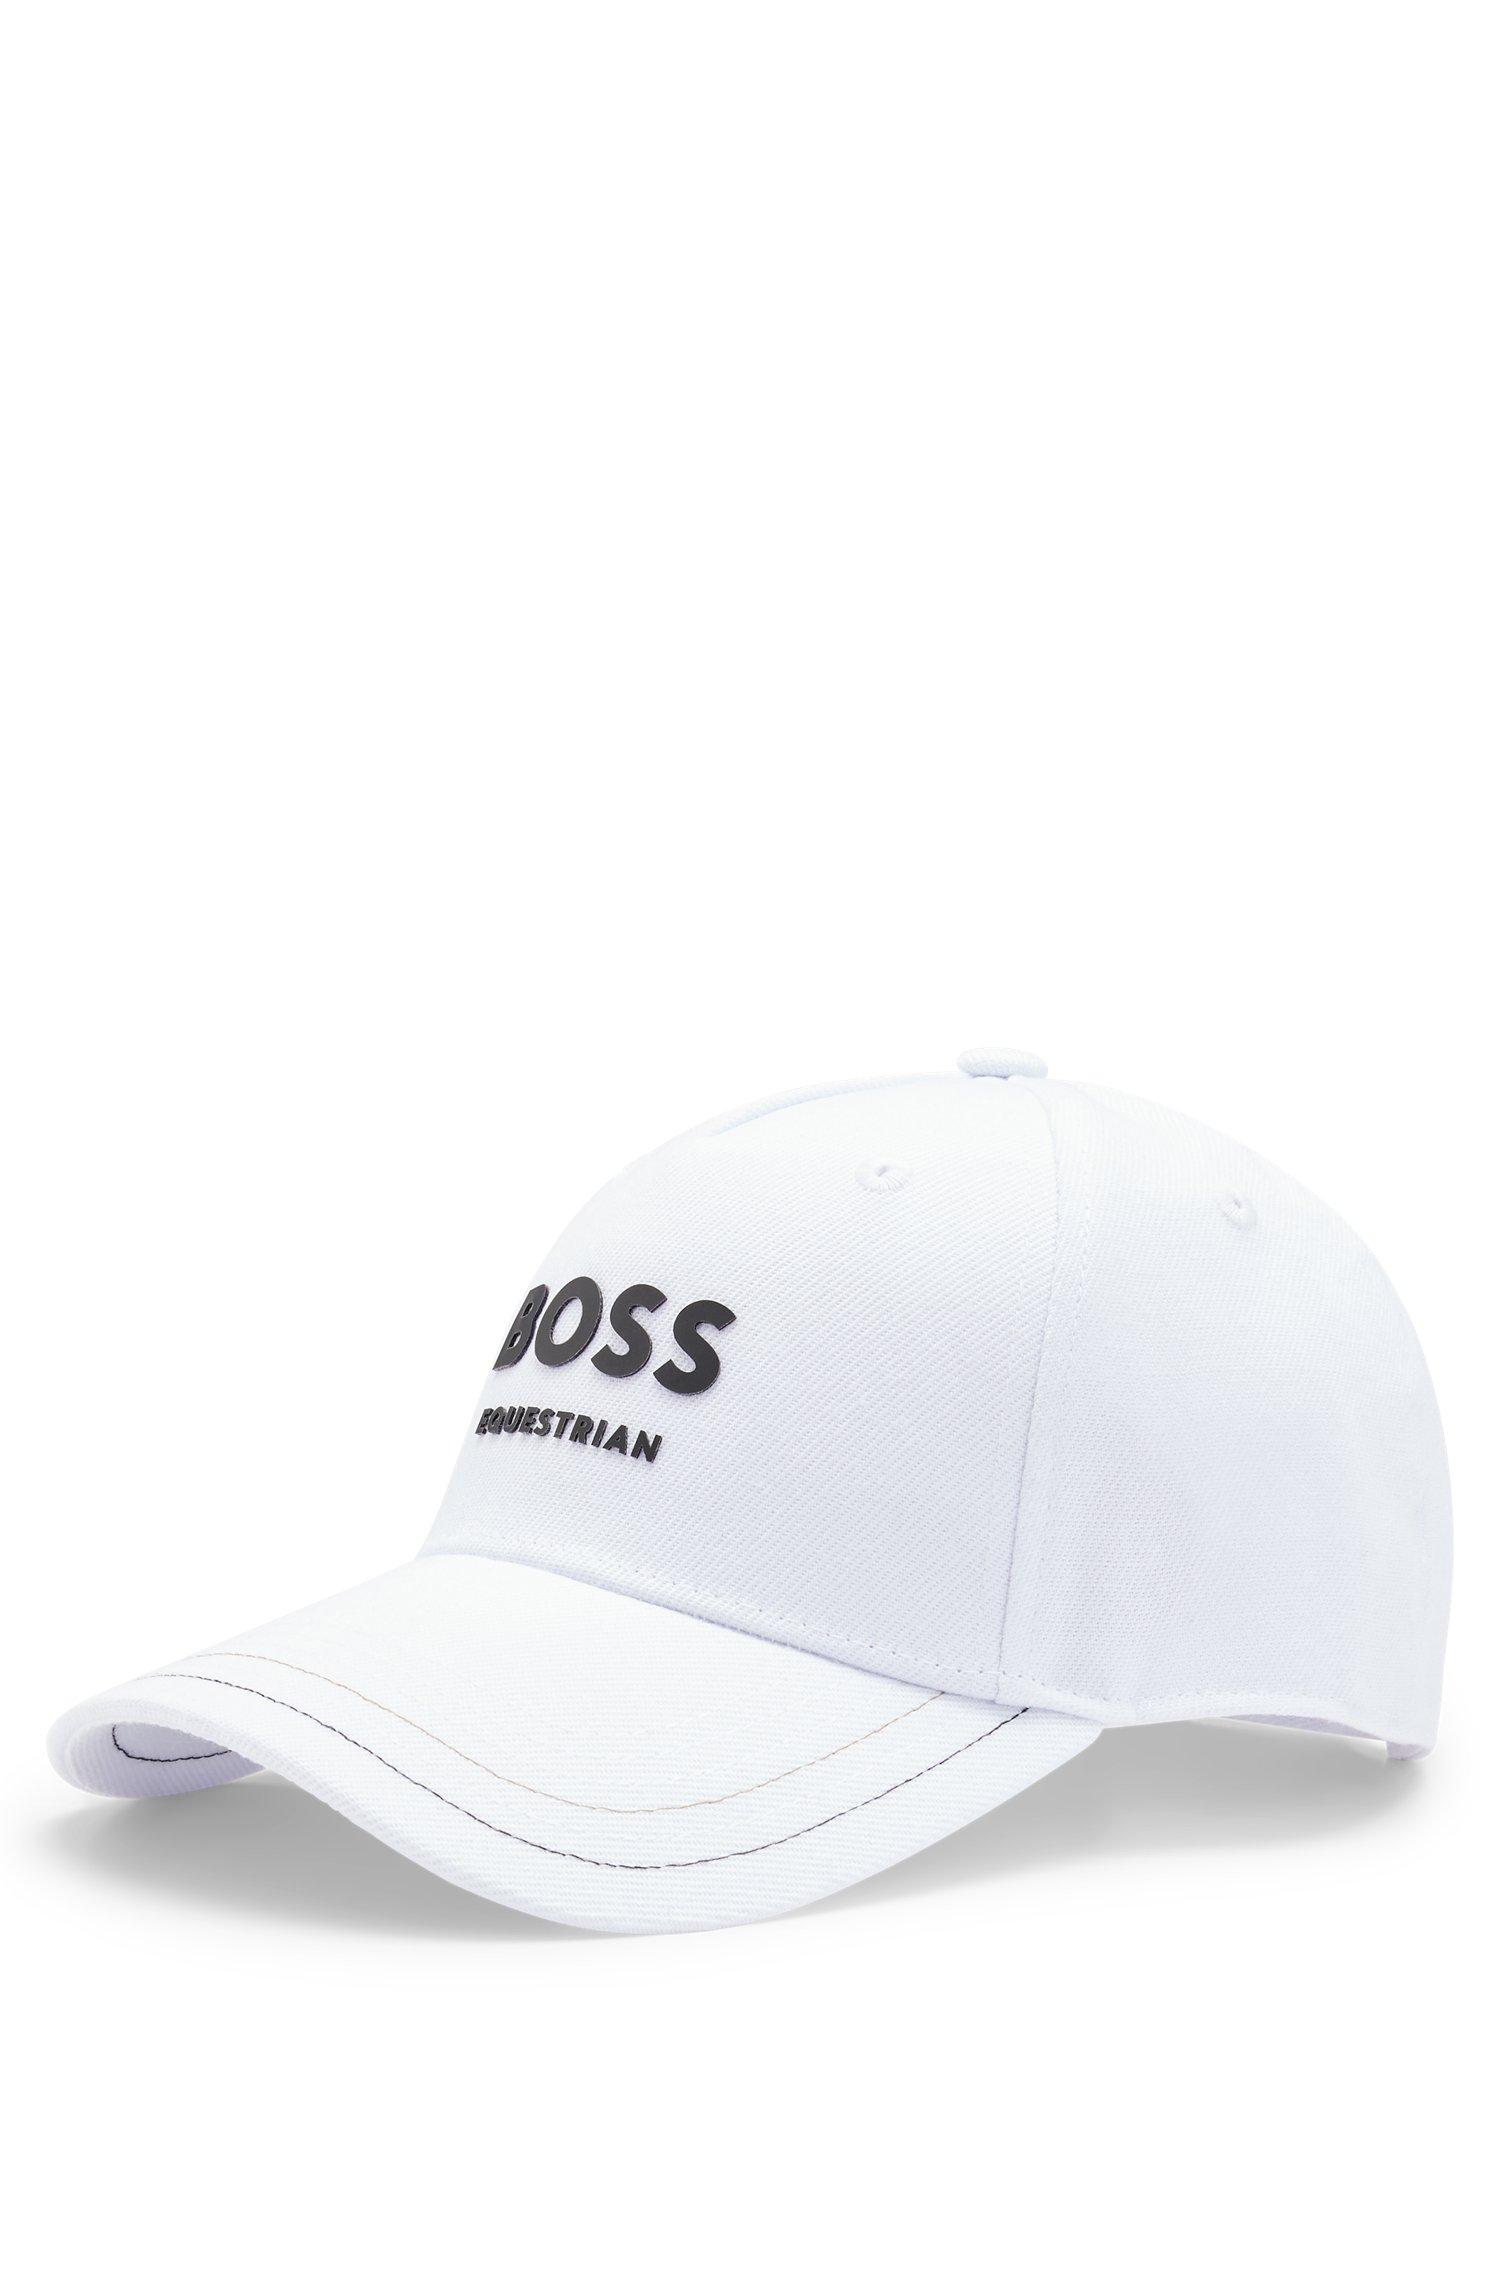 UK | With Equestrian White Details by BOSS in Cap Five-panel BOSS HUGO Logo Lyst